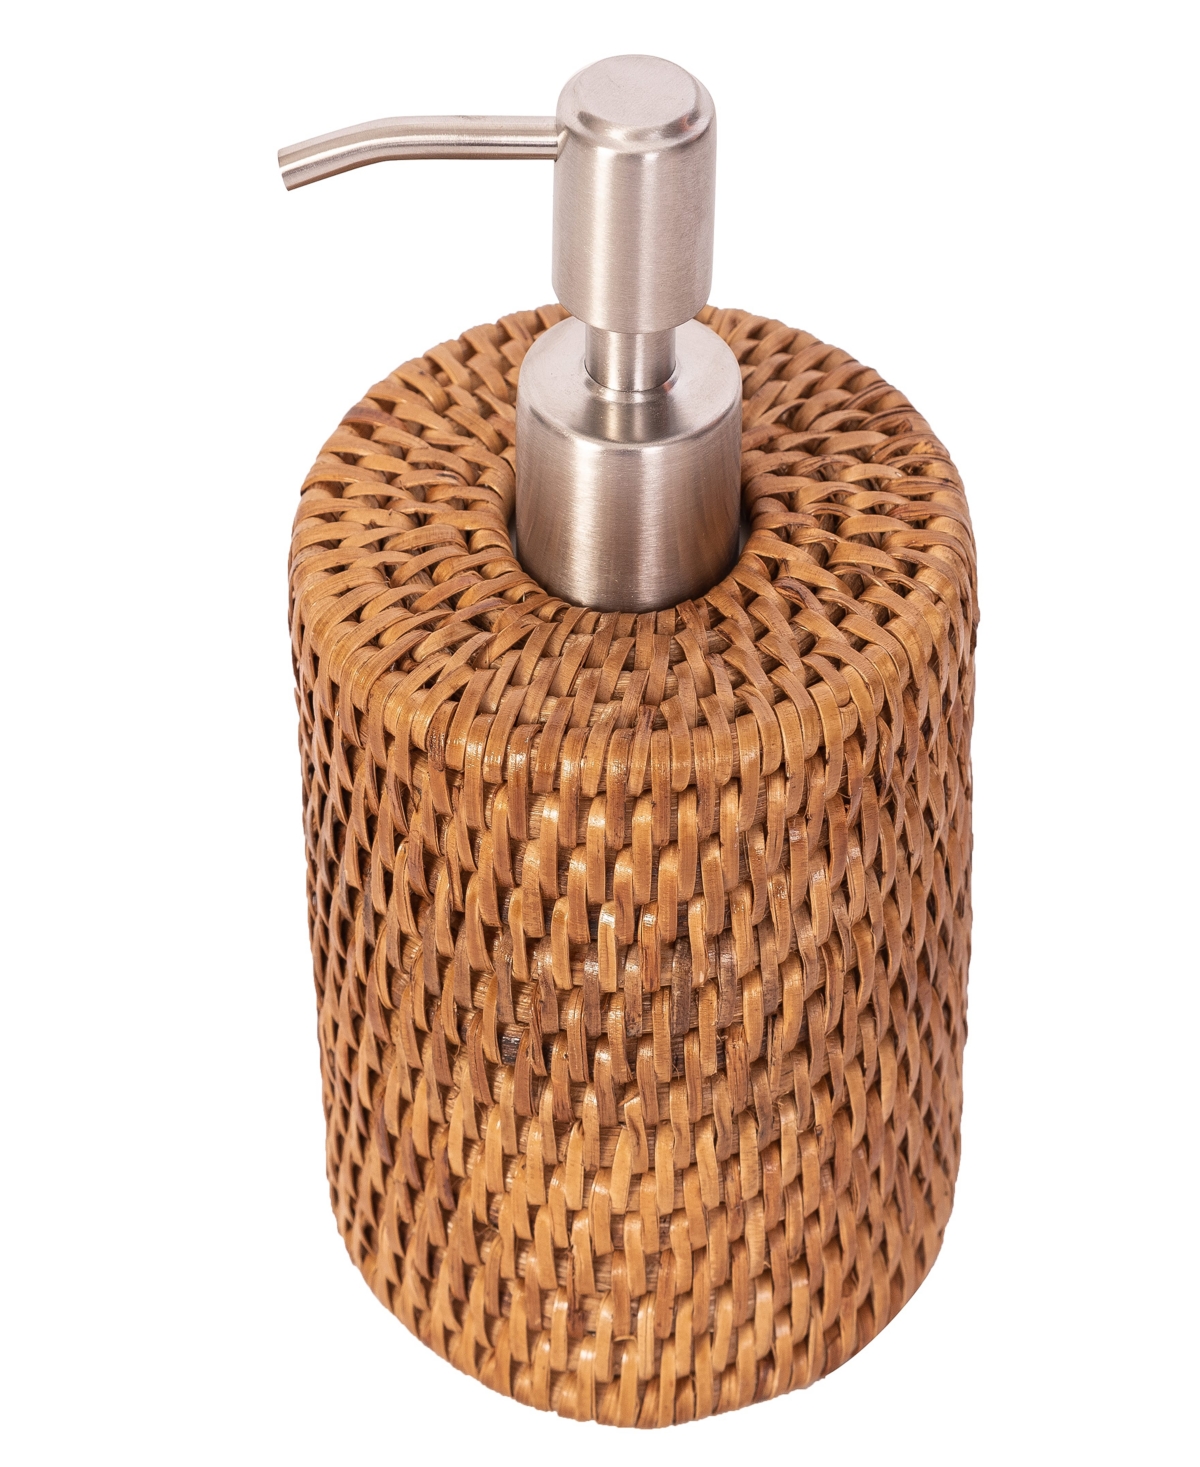 Artifacts Trading Company Artifacts Rattan Stainless Steel Polished Finish Soap Pump Dispenser In Honey Brown